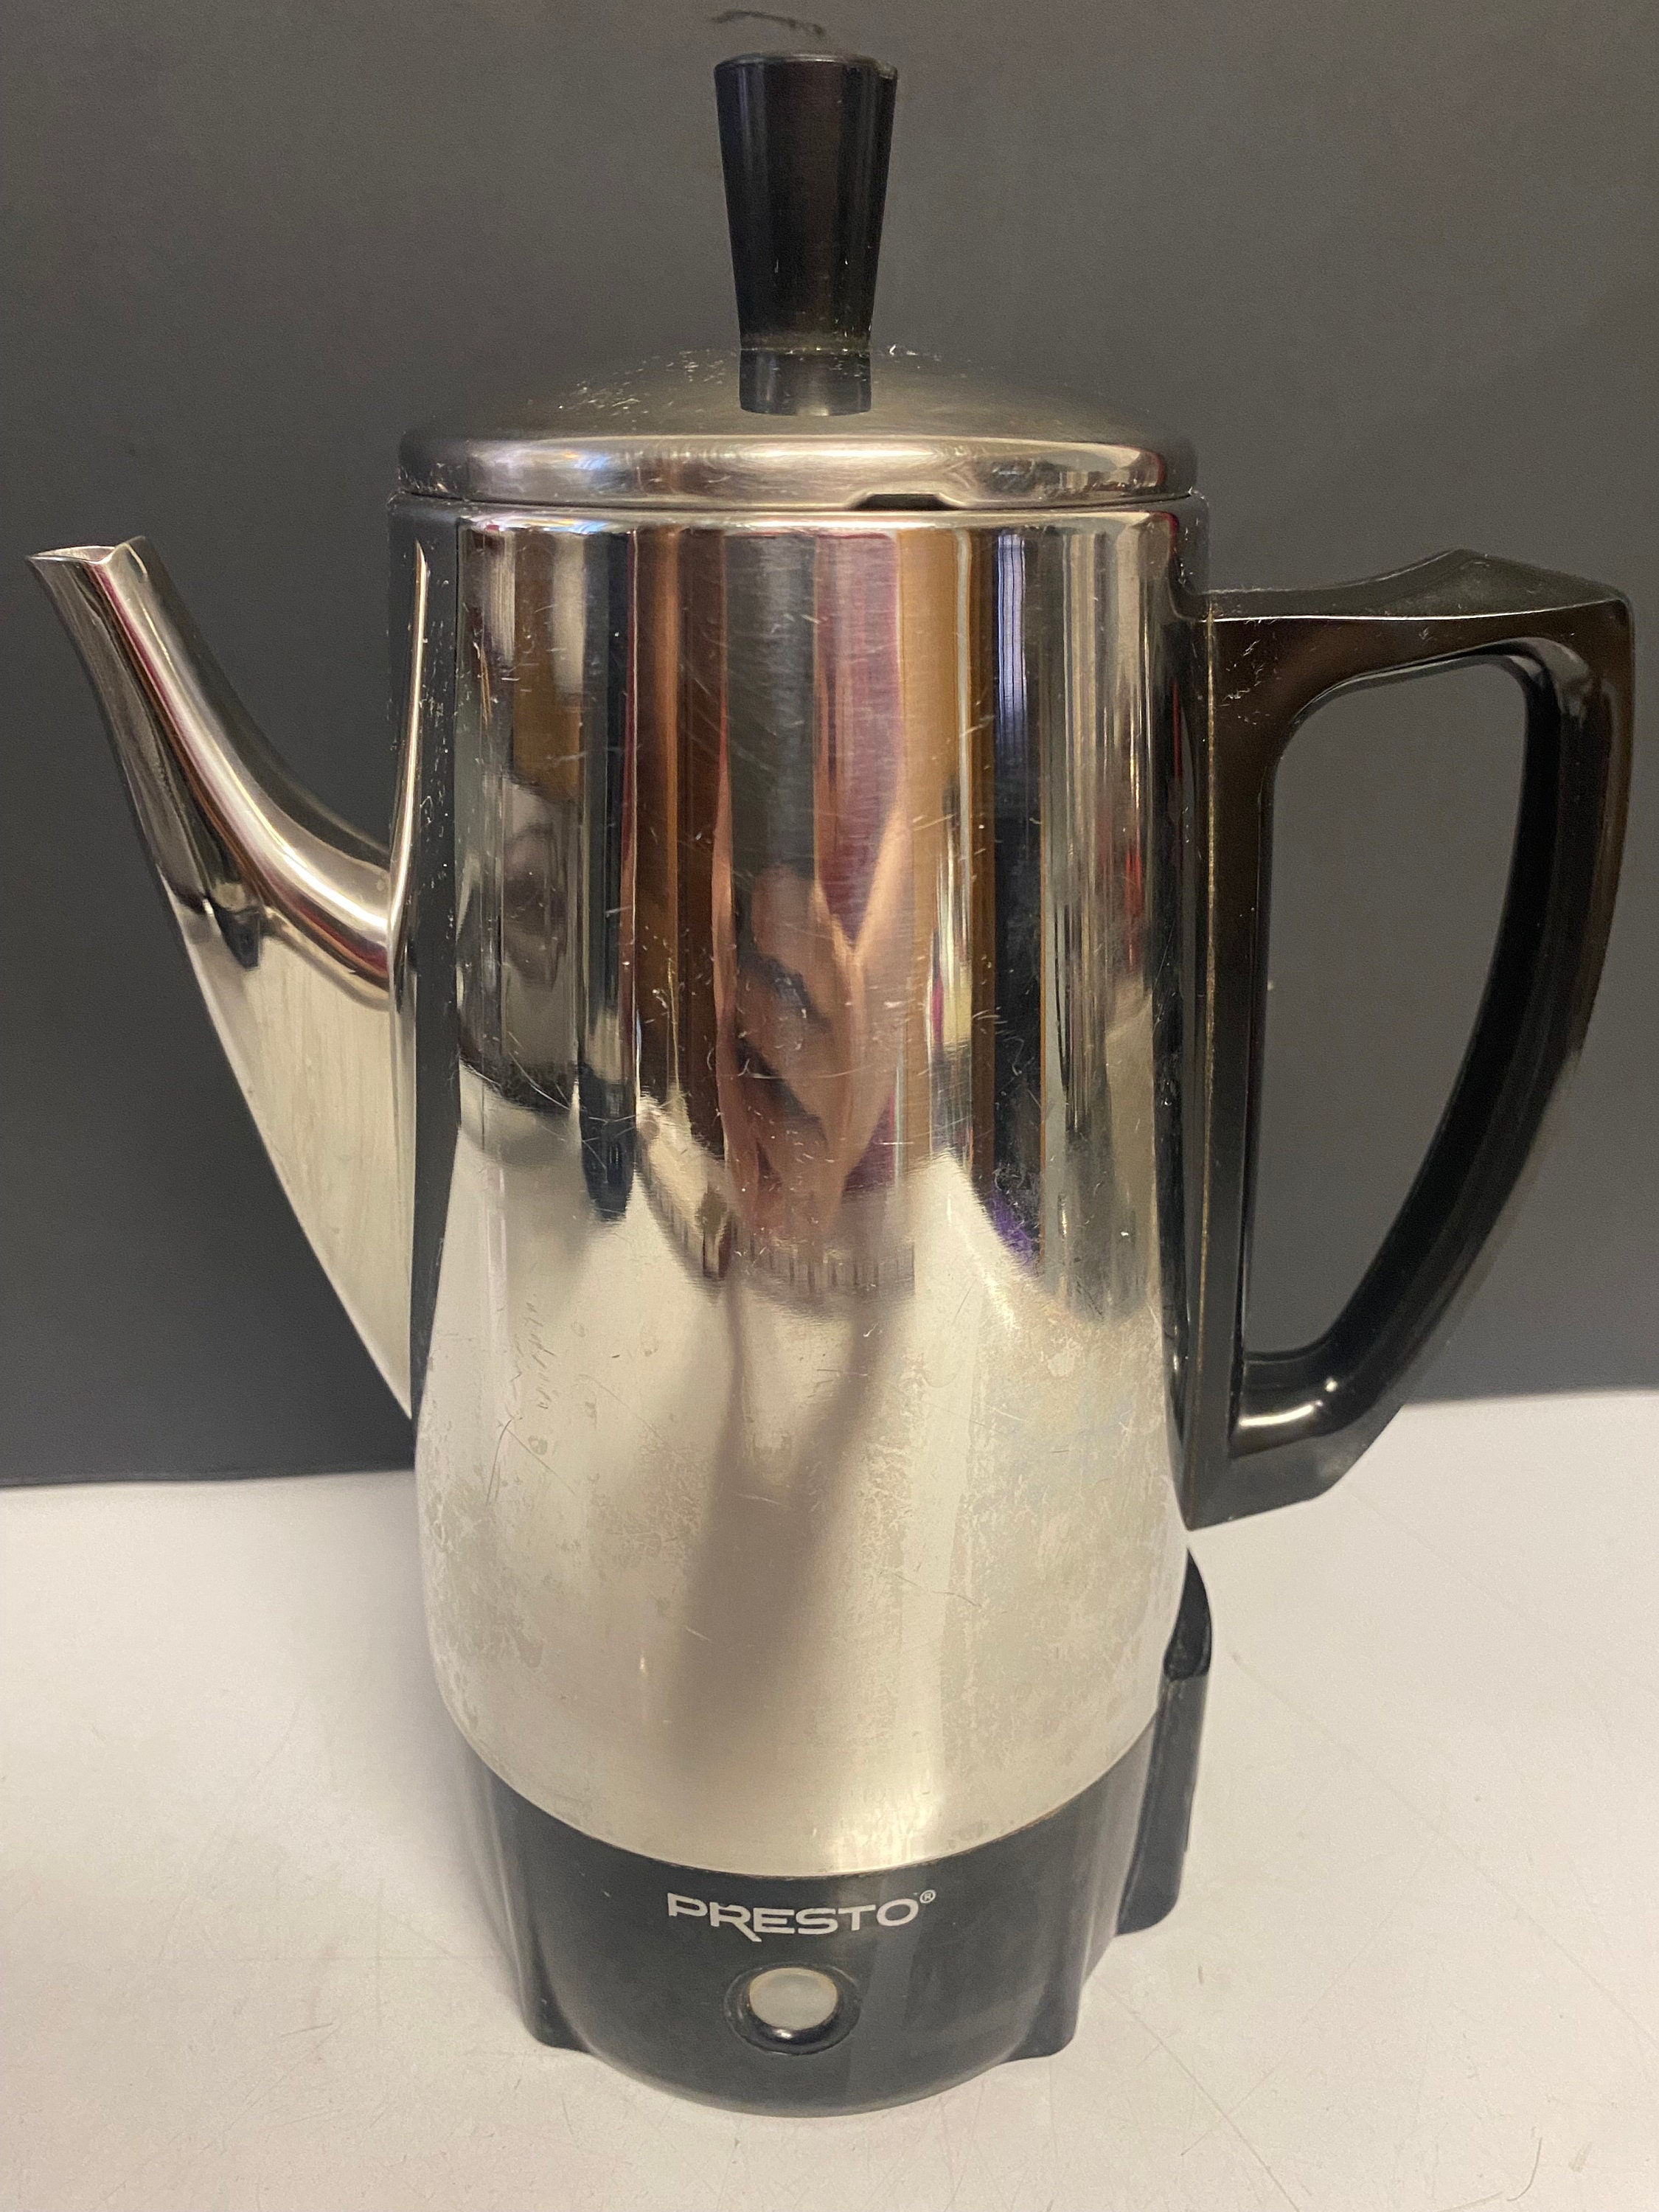 Presto Stainless Steel 12 Cup Percolator, Mid Century Electric